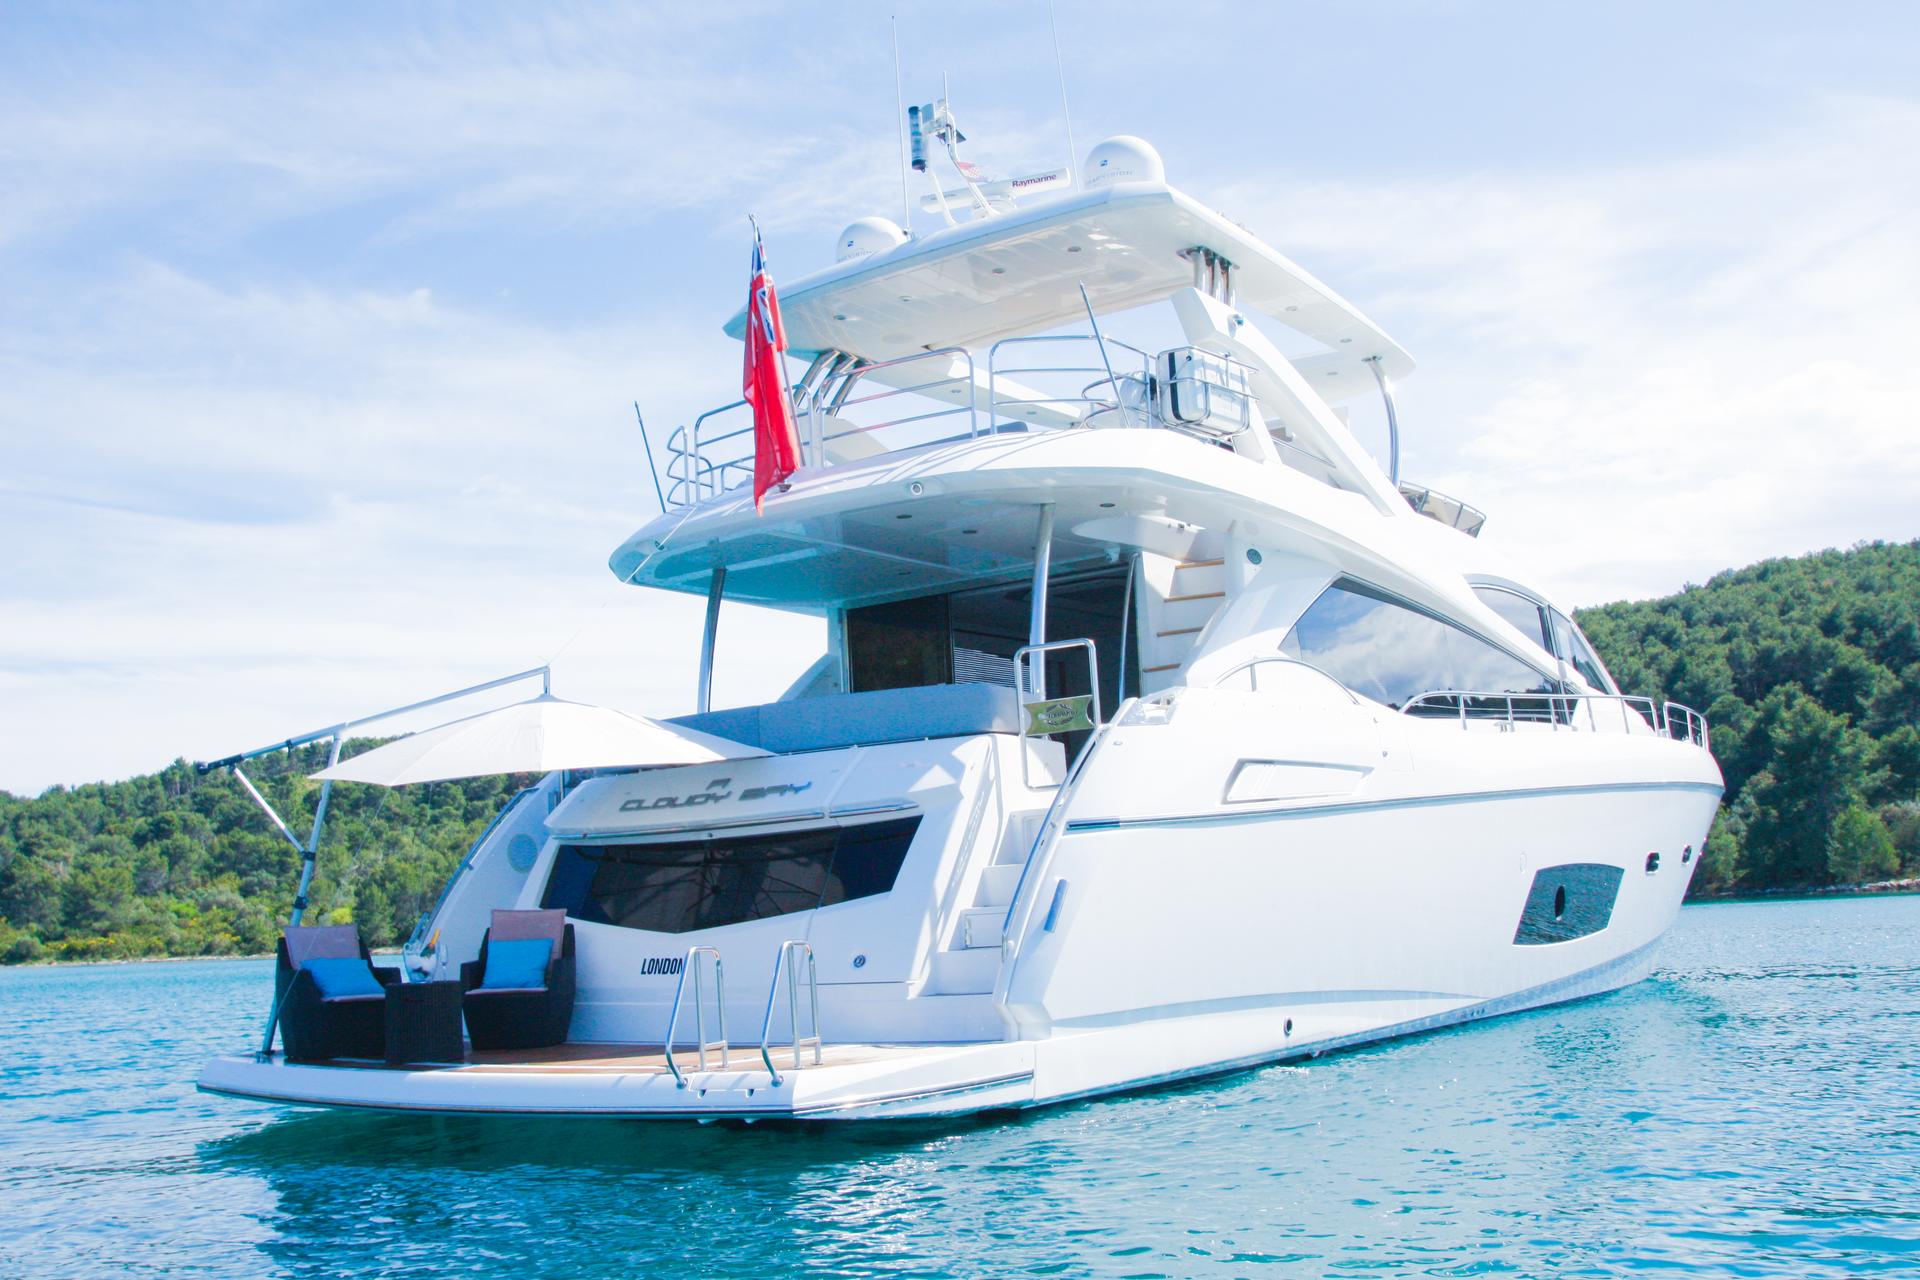 Cloudy bay Sunseeker Manhattan 73 crewed charter in Trogir includes 4 beautiful cabins, electric televisions & BBQ grill